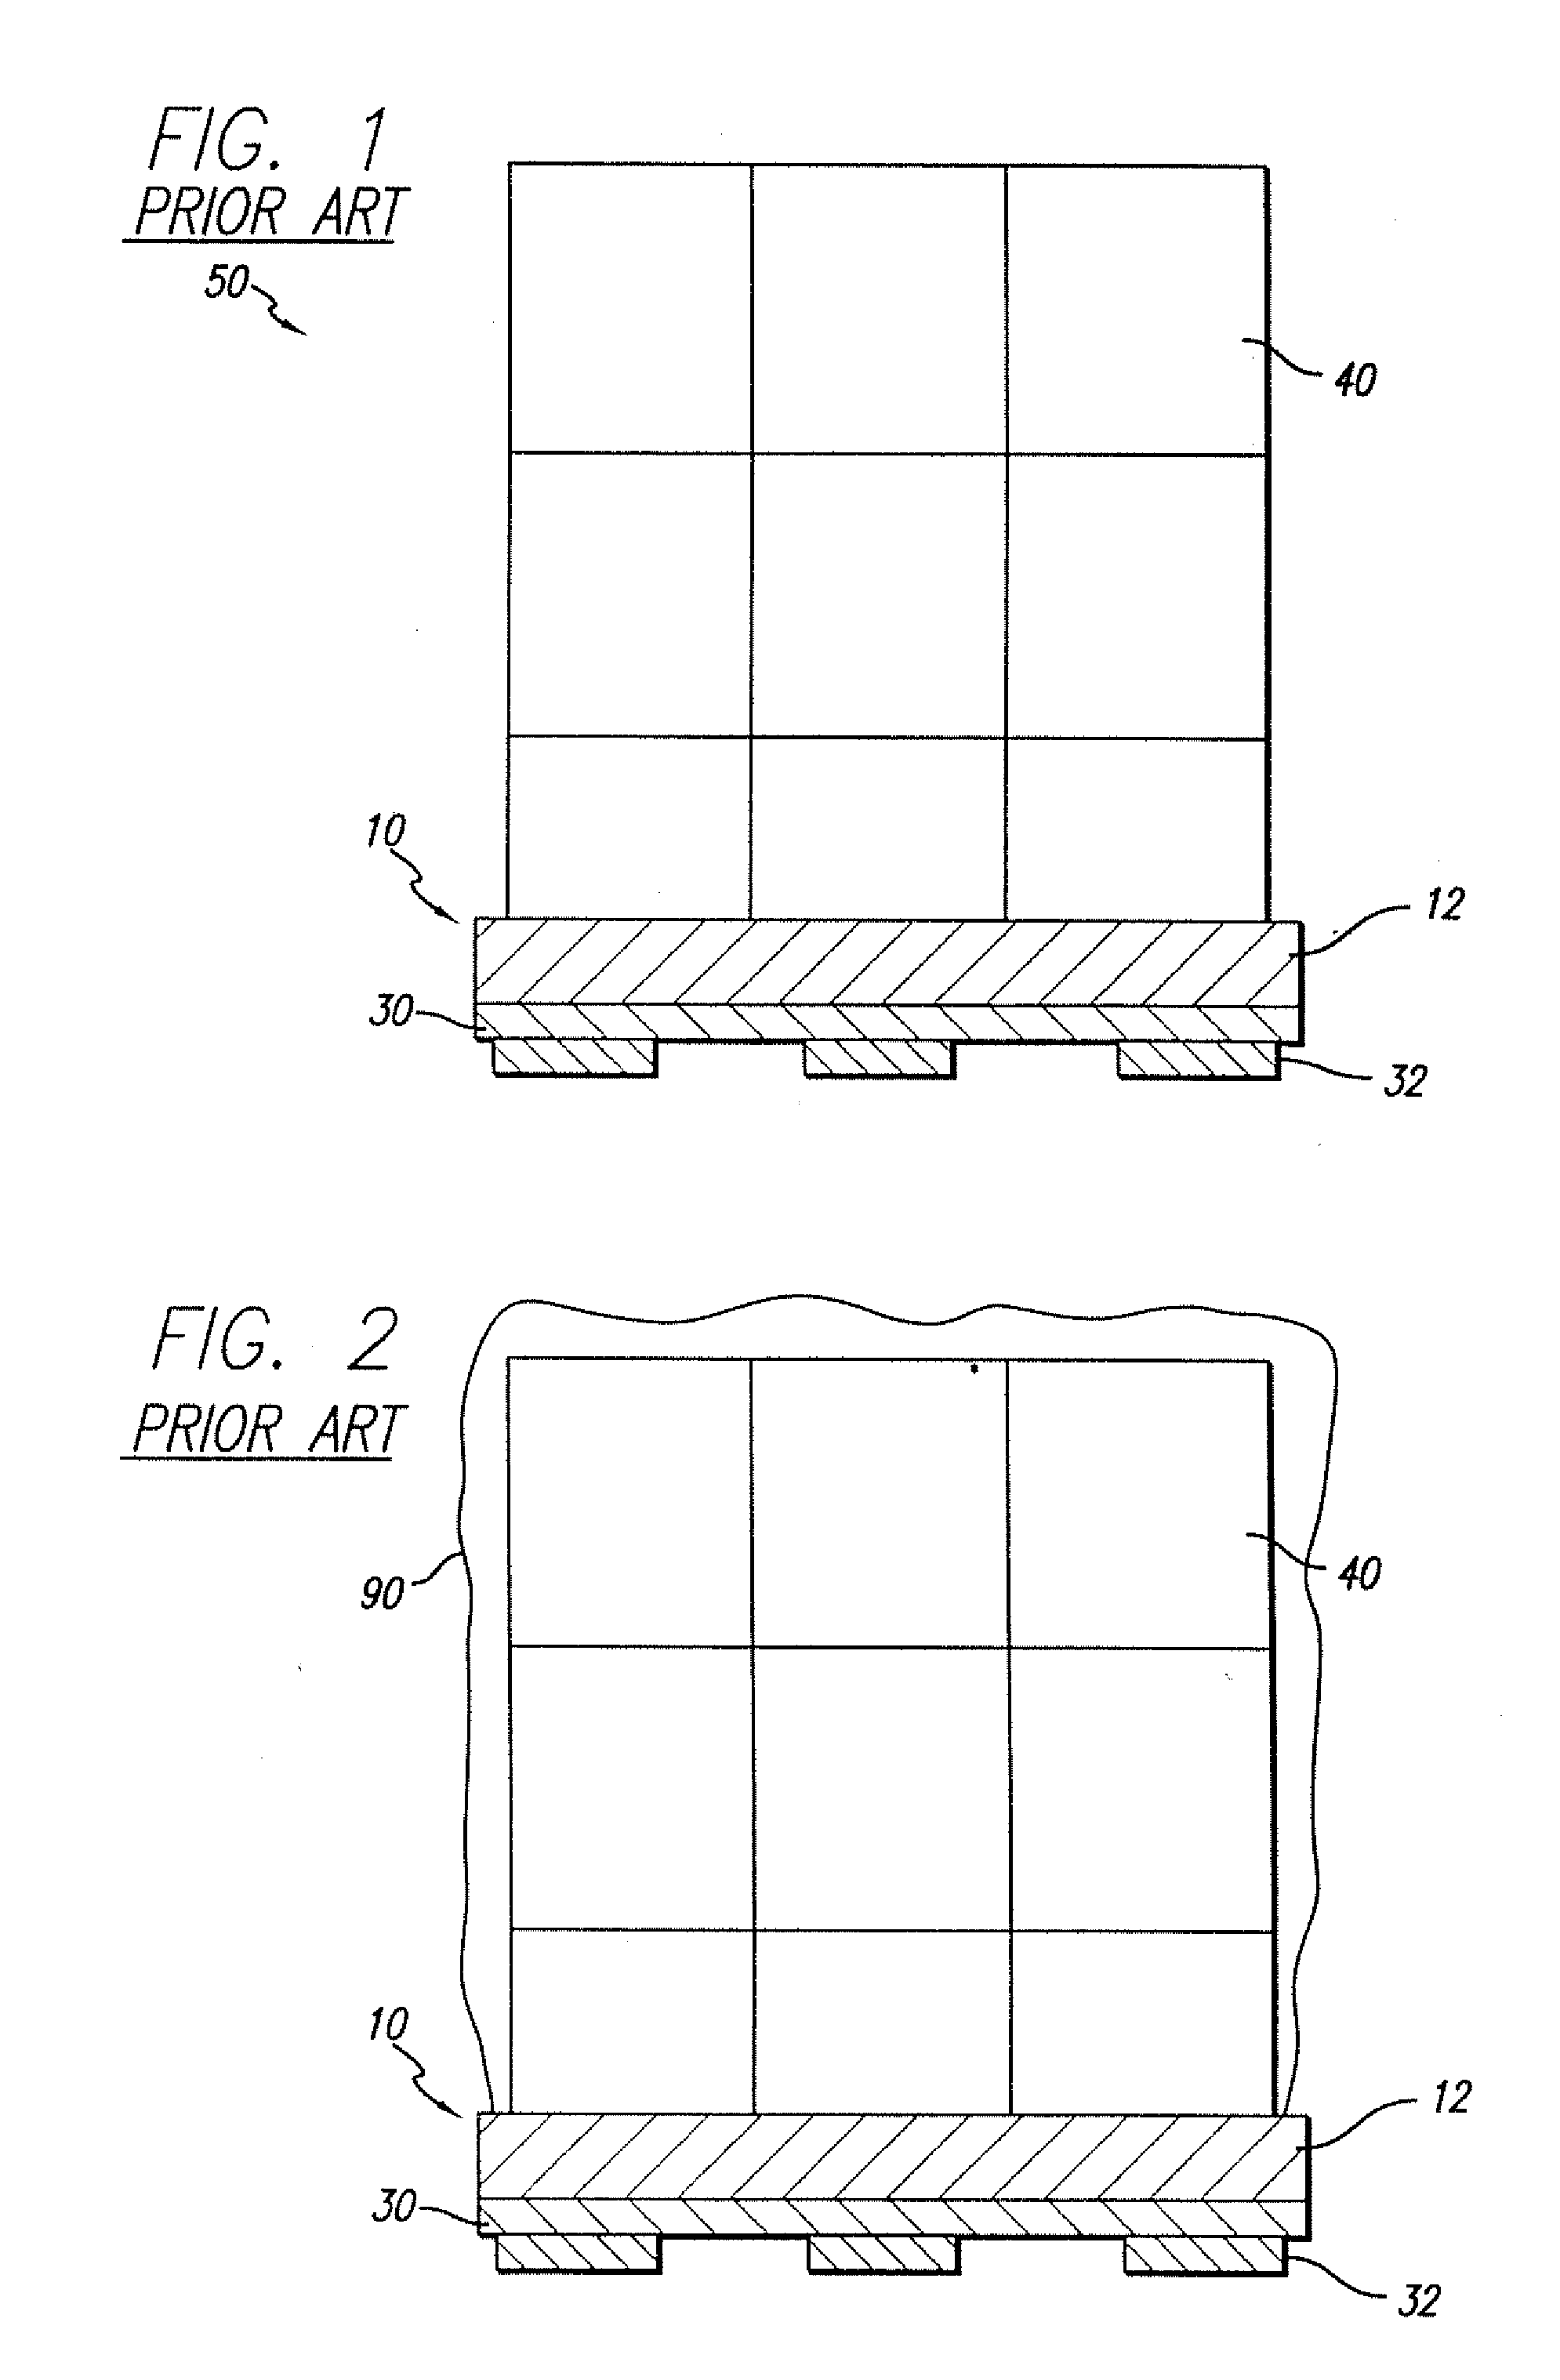 System and method for providing a regulated atmosphere for packaging perishable goods